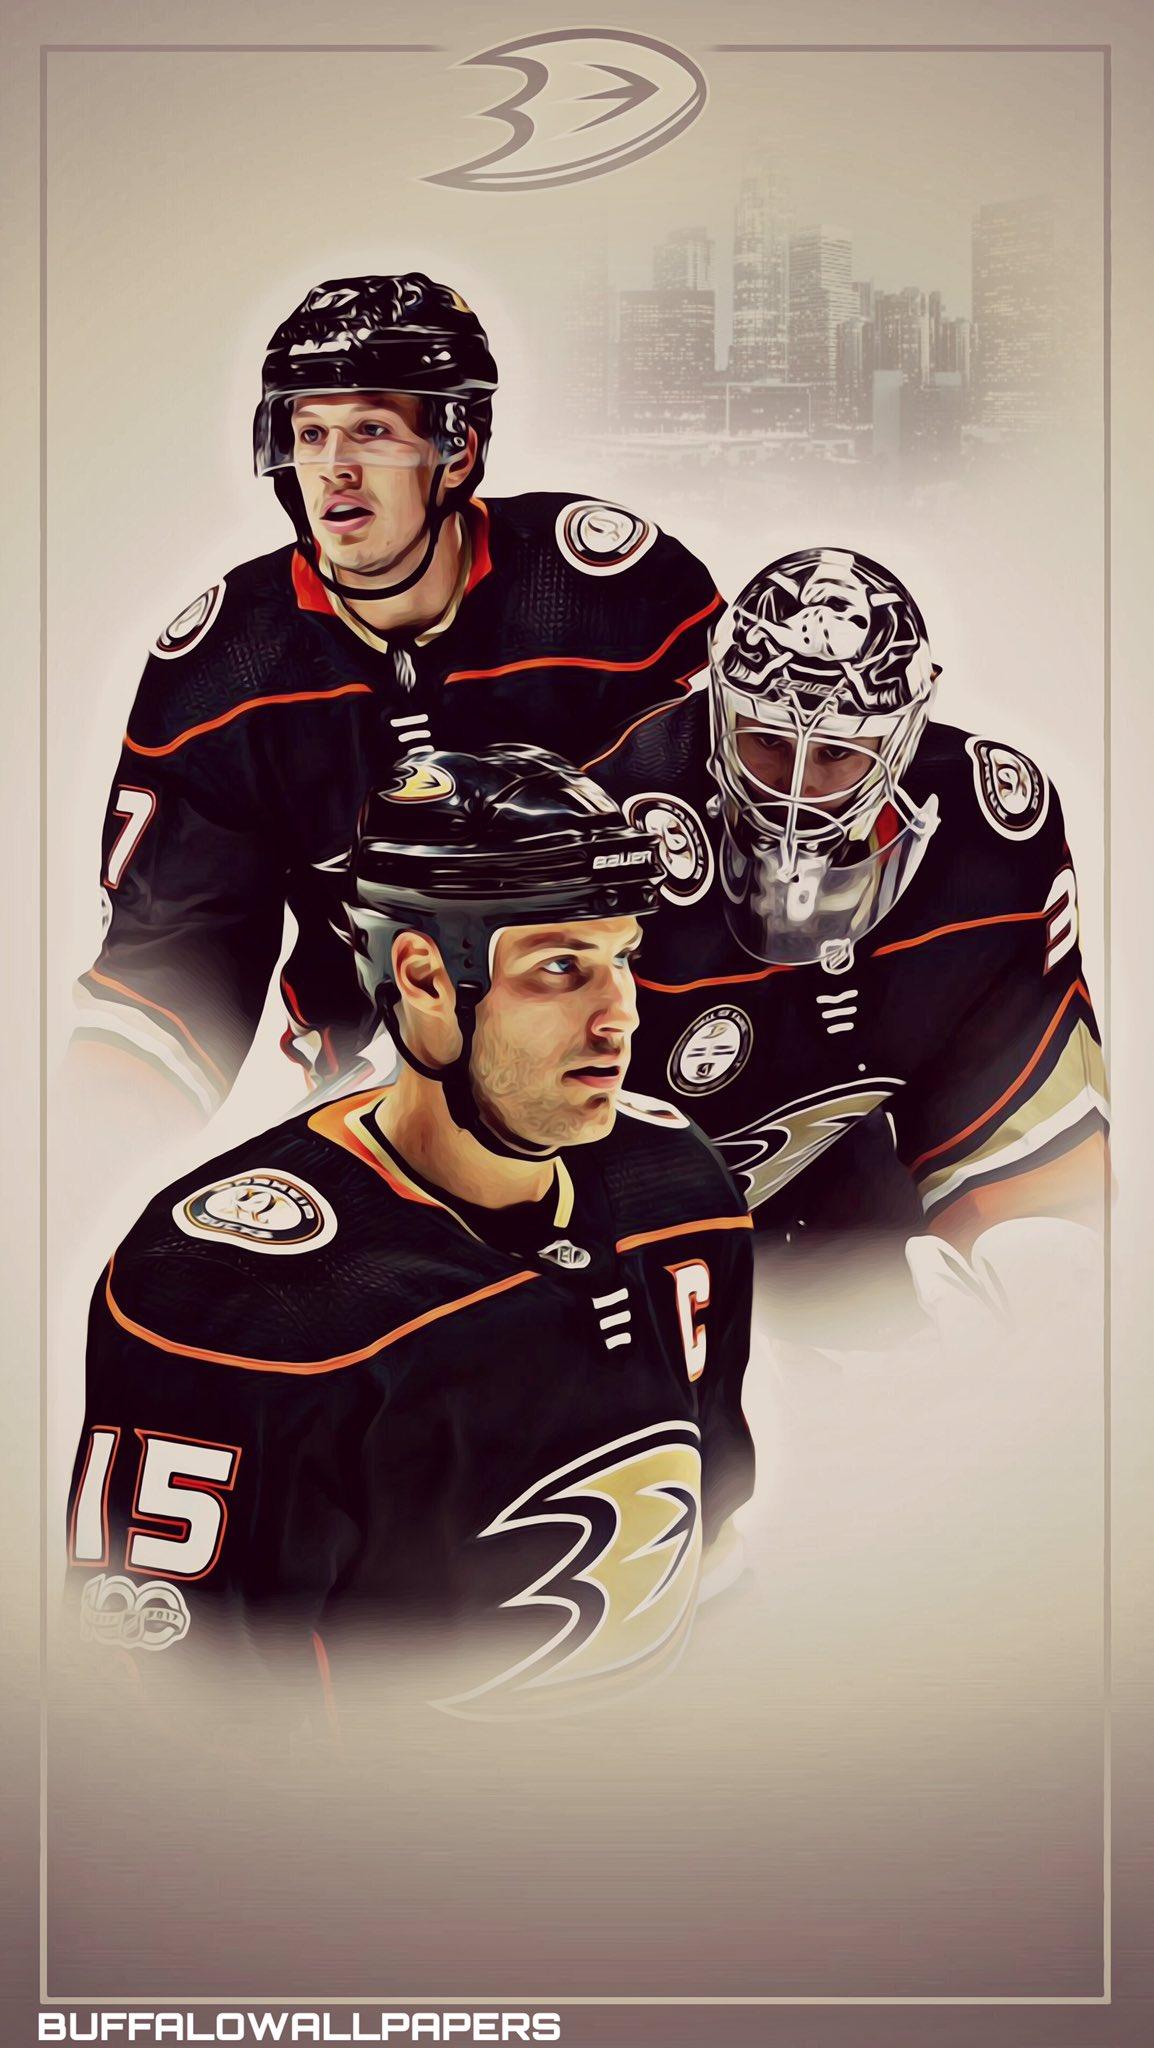 Anaheim Mighty Ducks Wallpapers Iphone - Wallpaper Cave